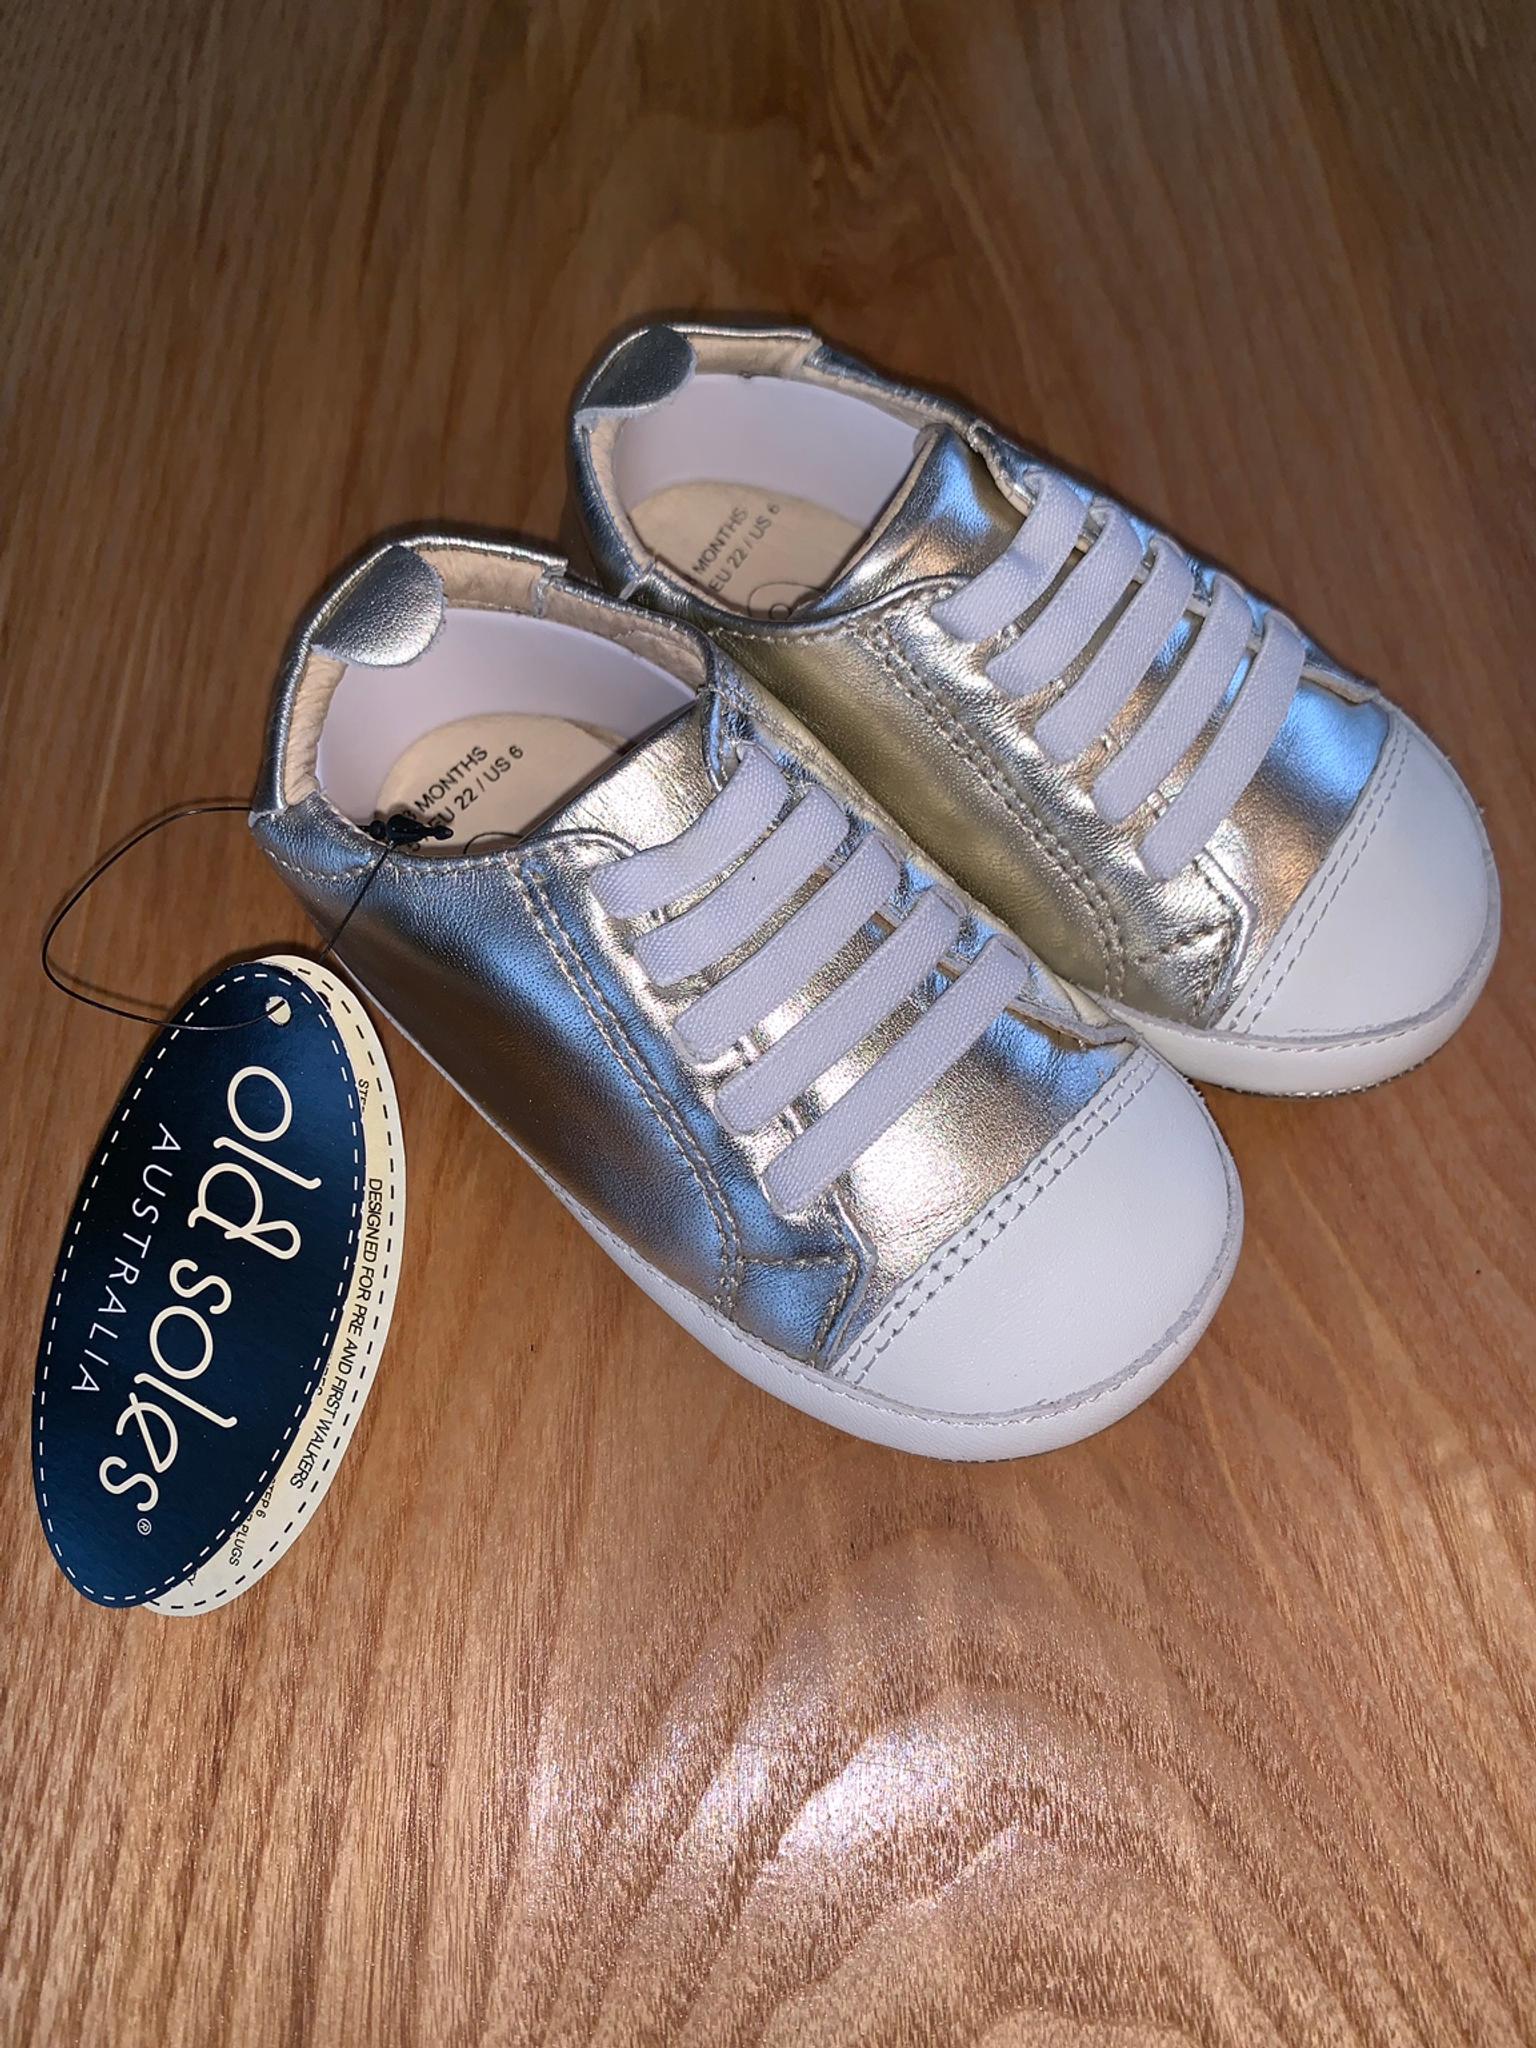 baby first shoes for walking australia